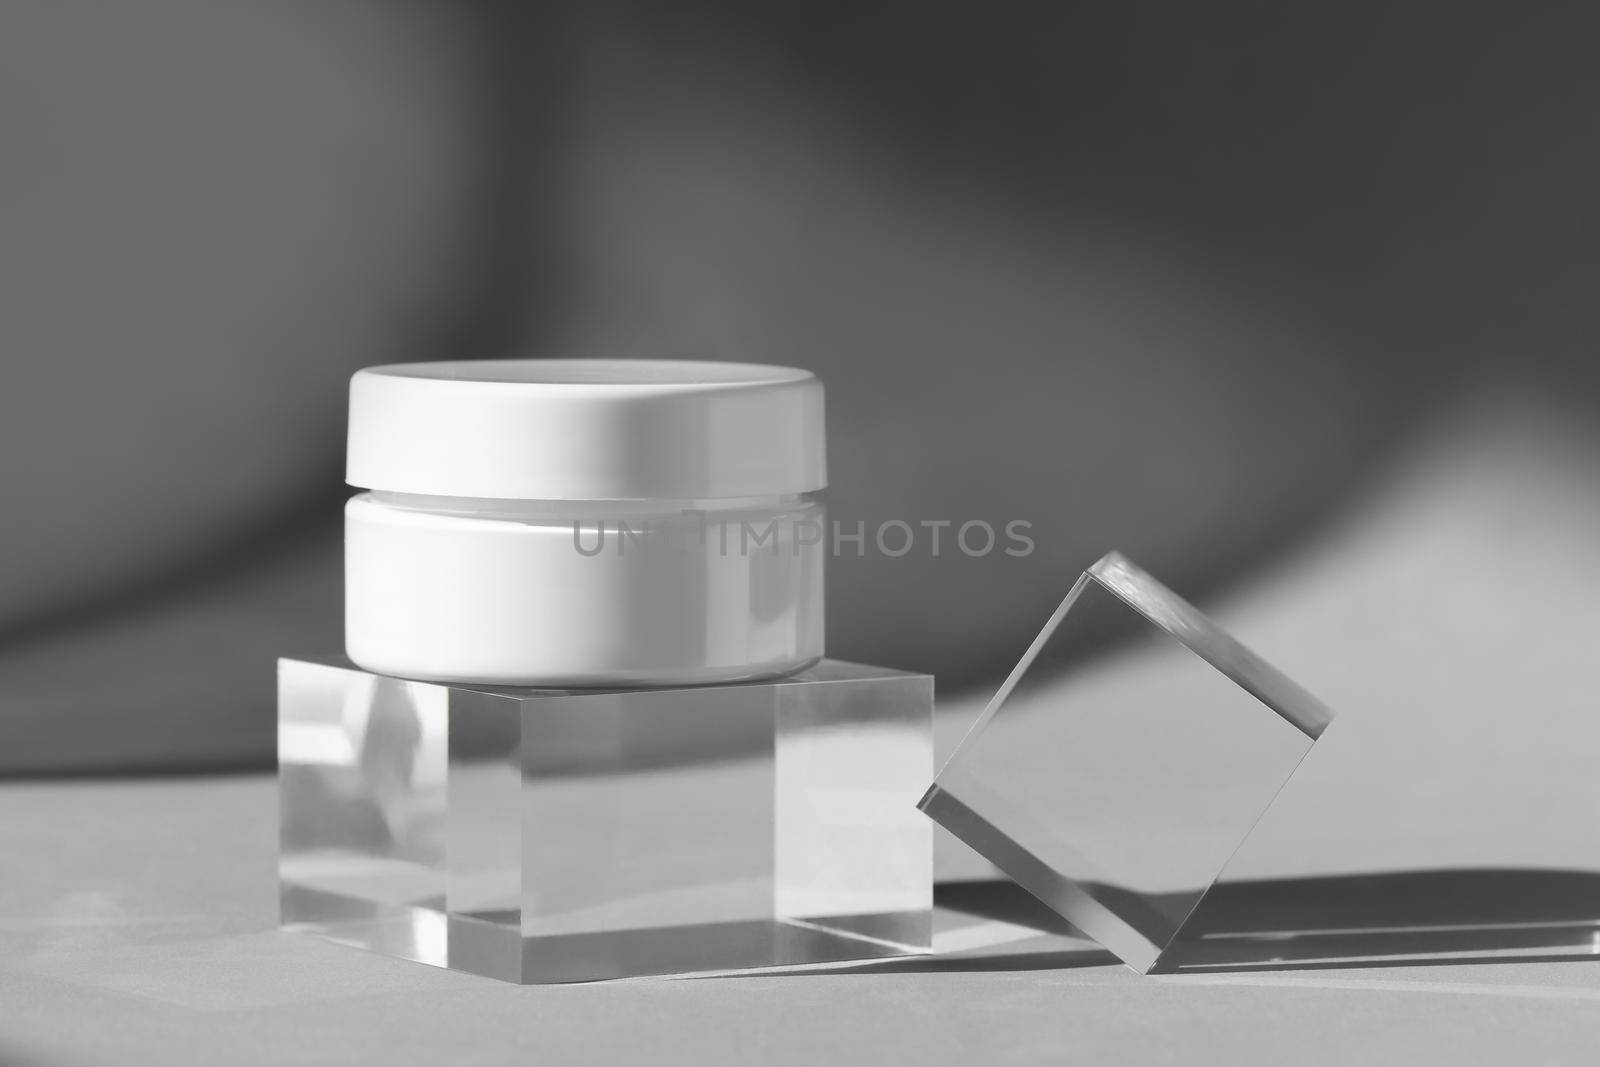 Cream lotion cosmetics showcase presentation mockup. White creme cosmetic jar on acrylic geometric pedestal podium block, product packaging with shadows from windows by photolime